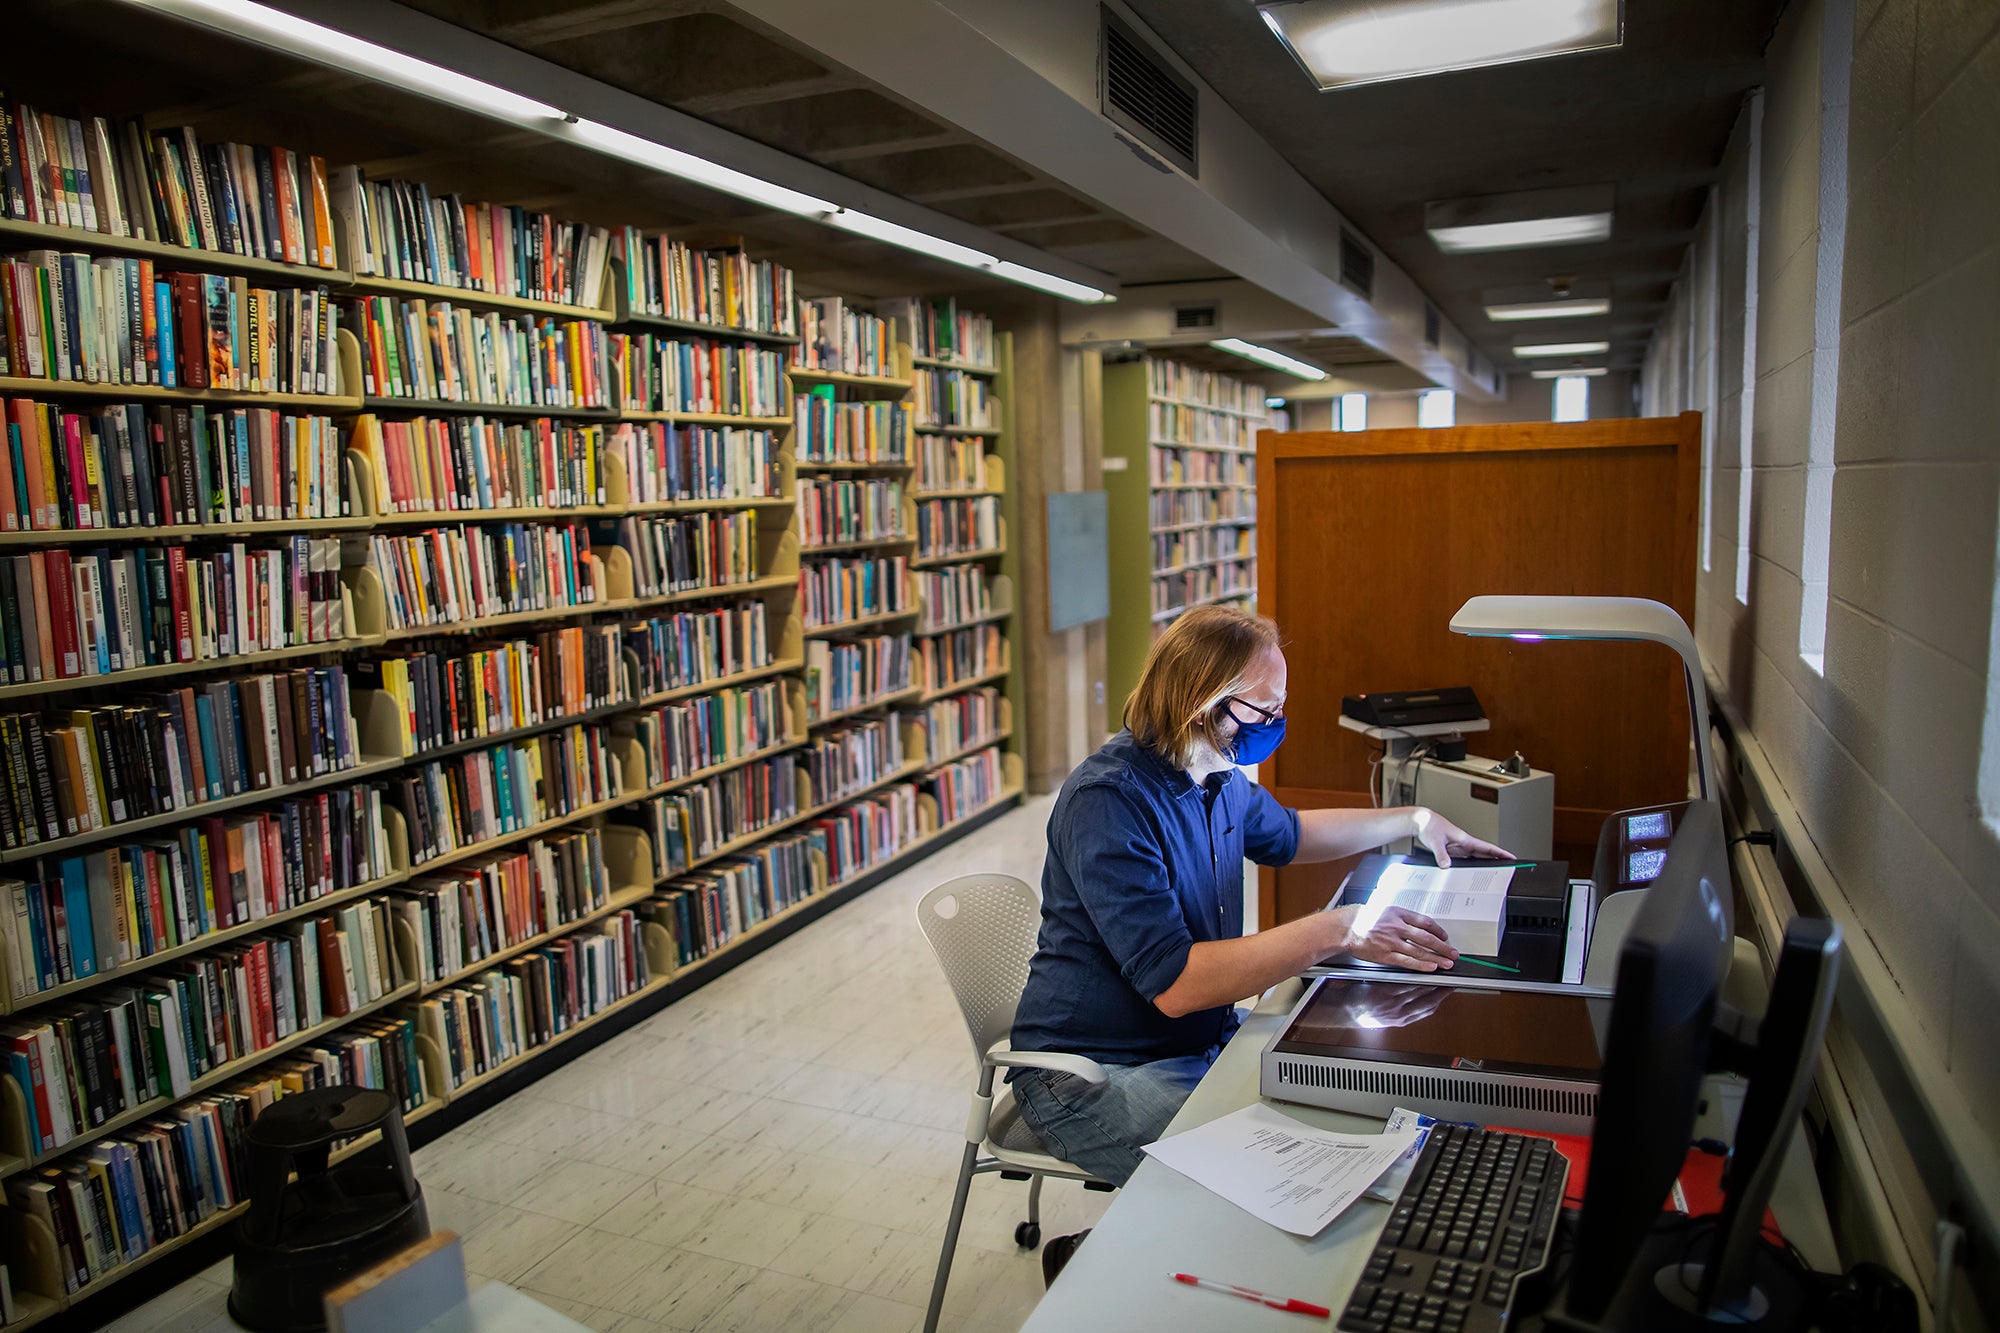 A library staff member sits at a desk scanning pages of a book. Behind him is a floor to ceiling bookshelf.